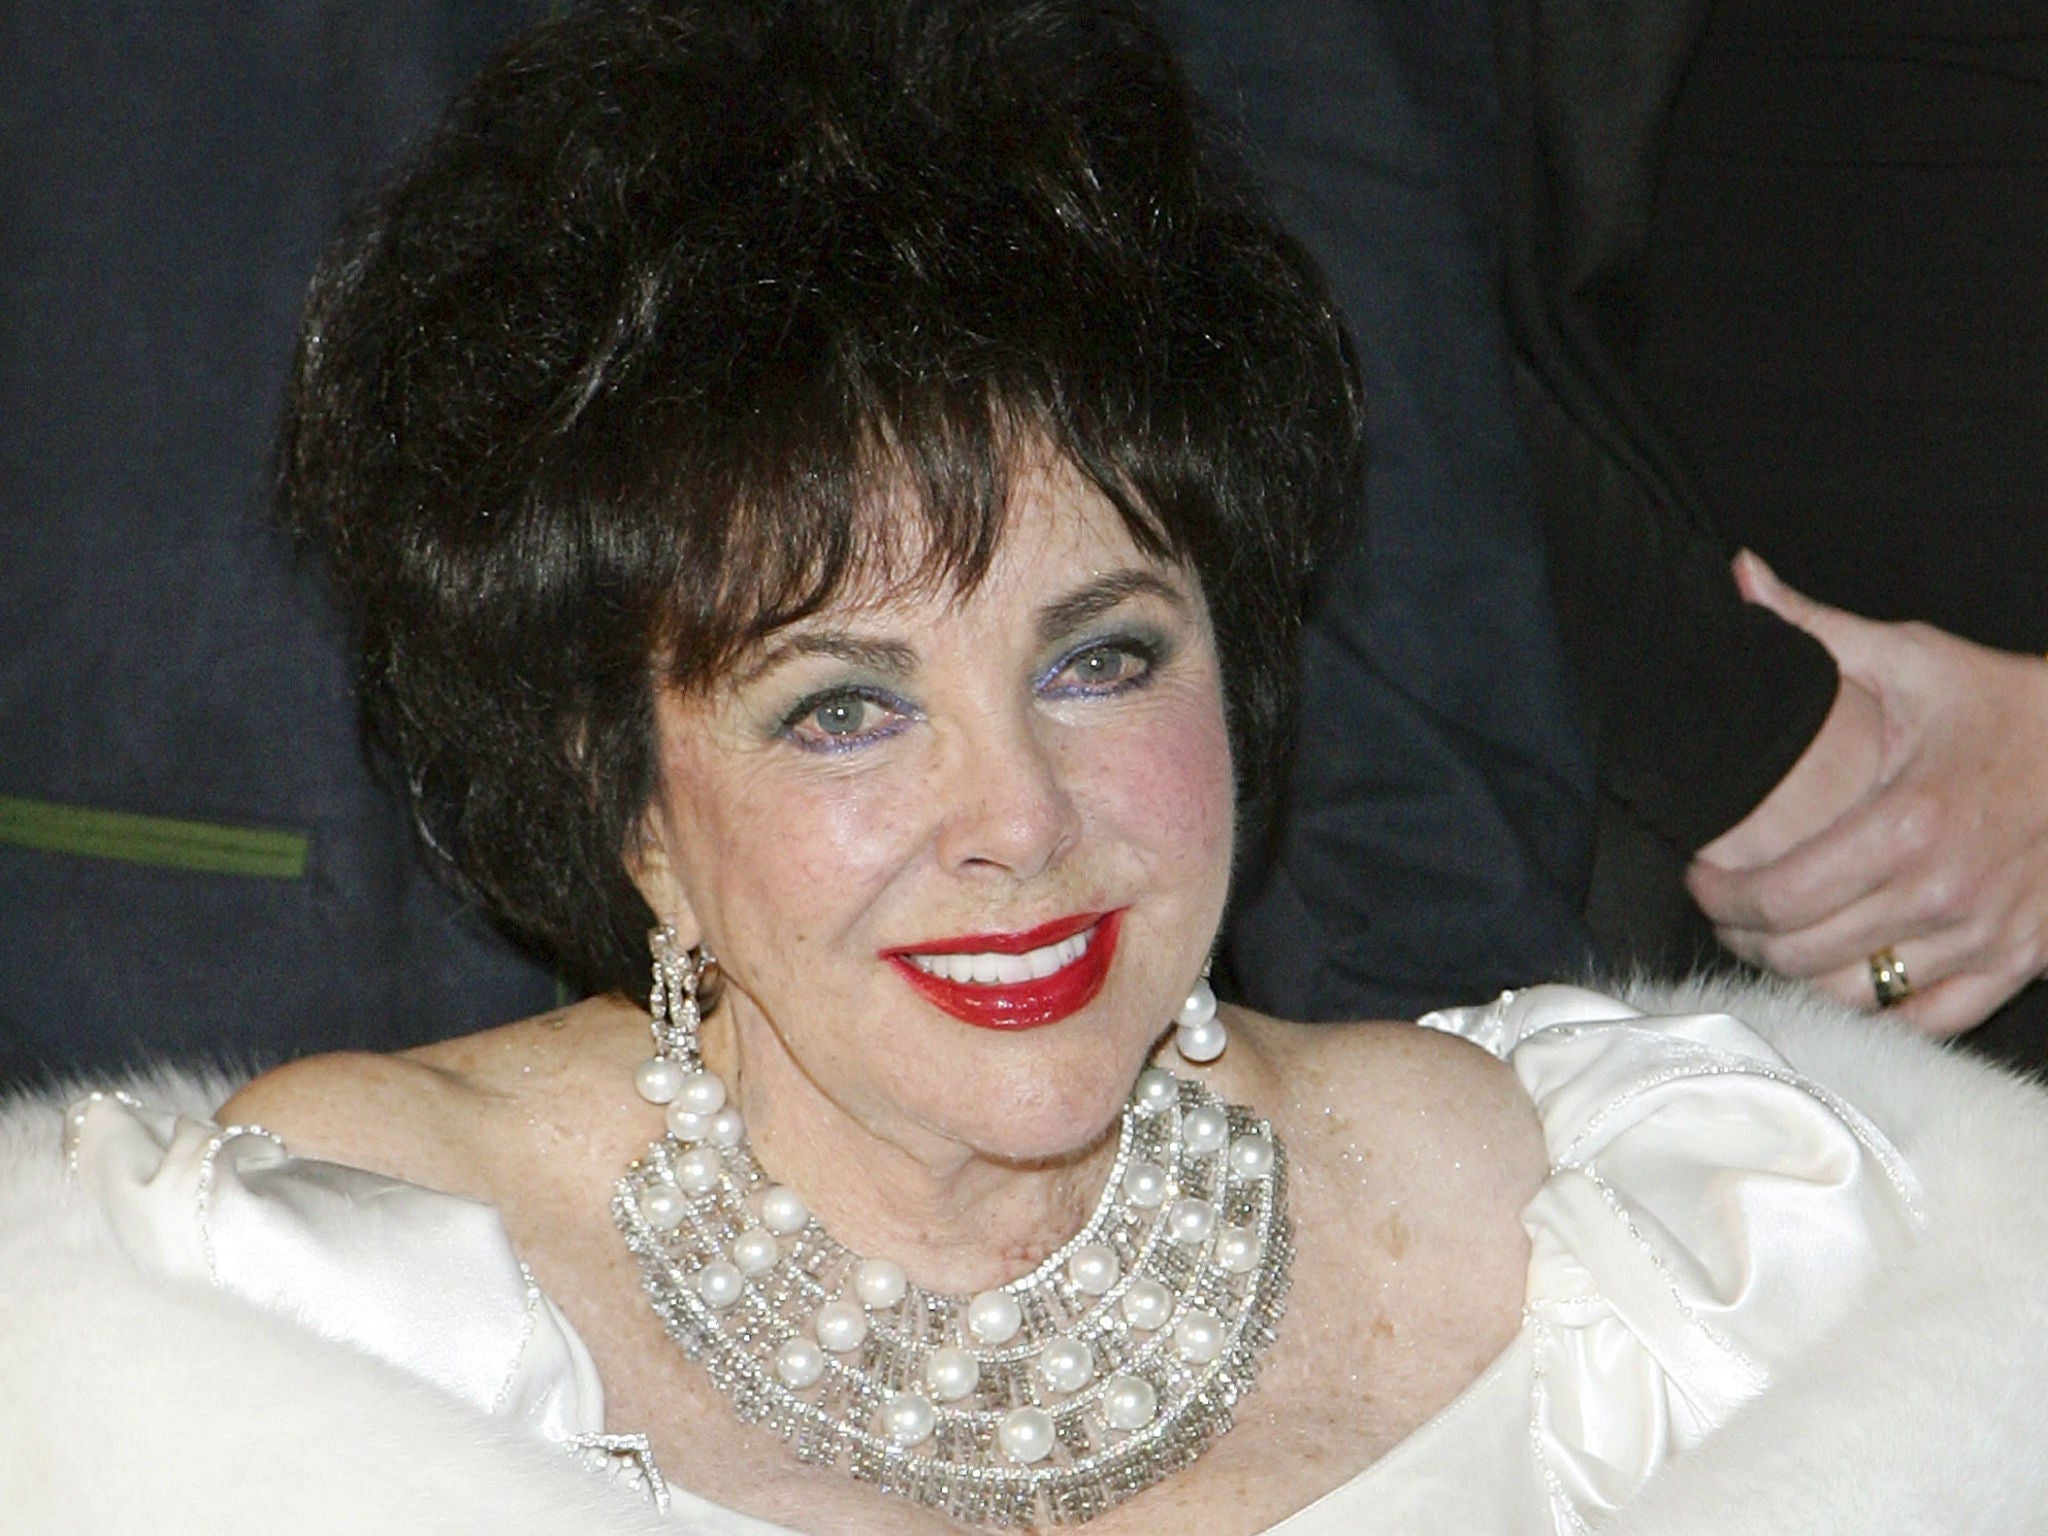 Dame Elizabeth Taylor diedaged 79 in 2011, she is pictured here in 2007